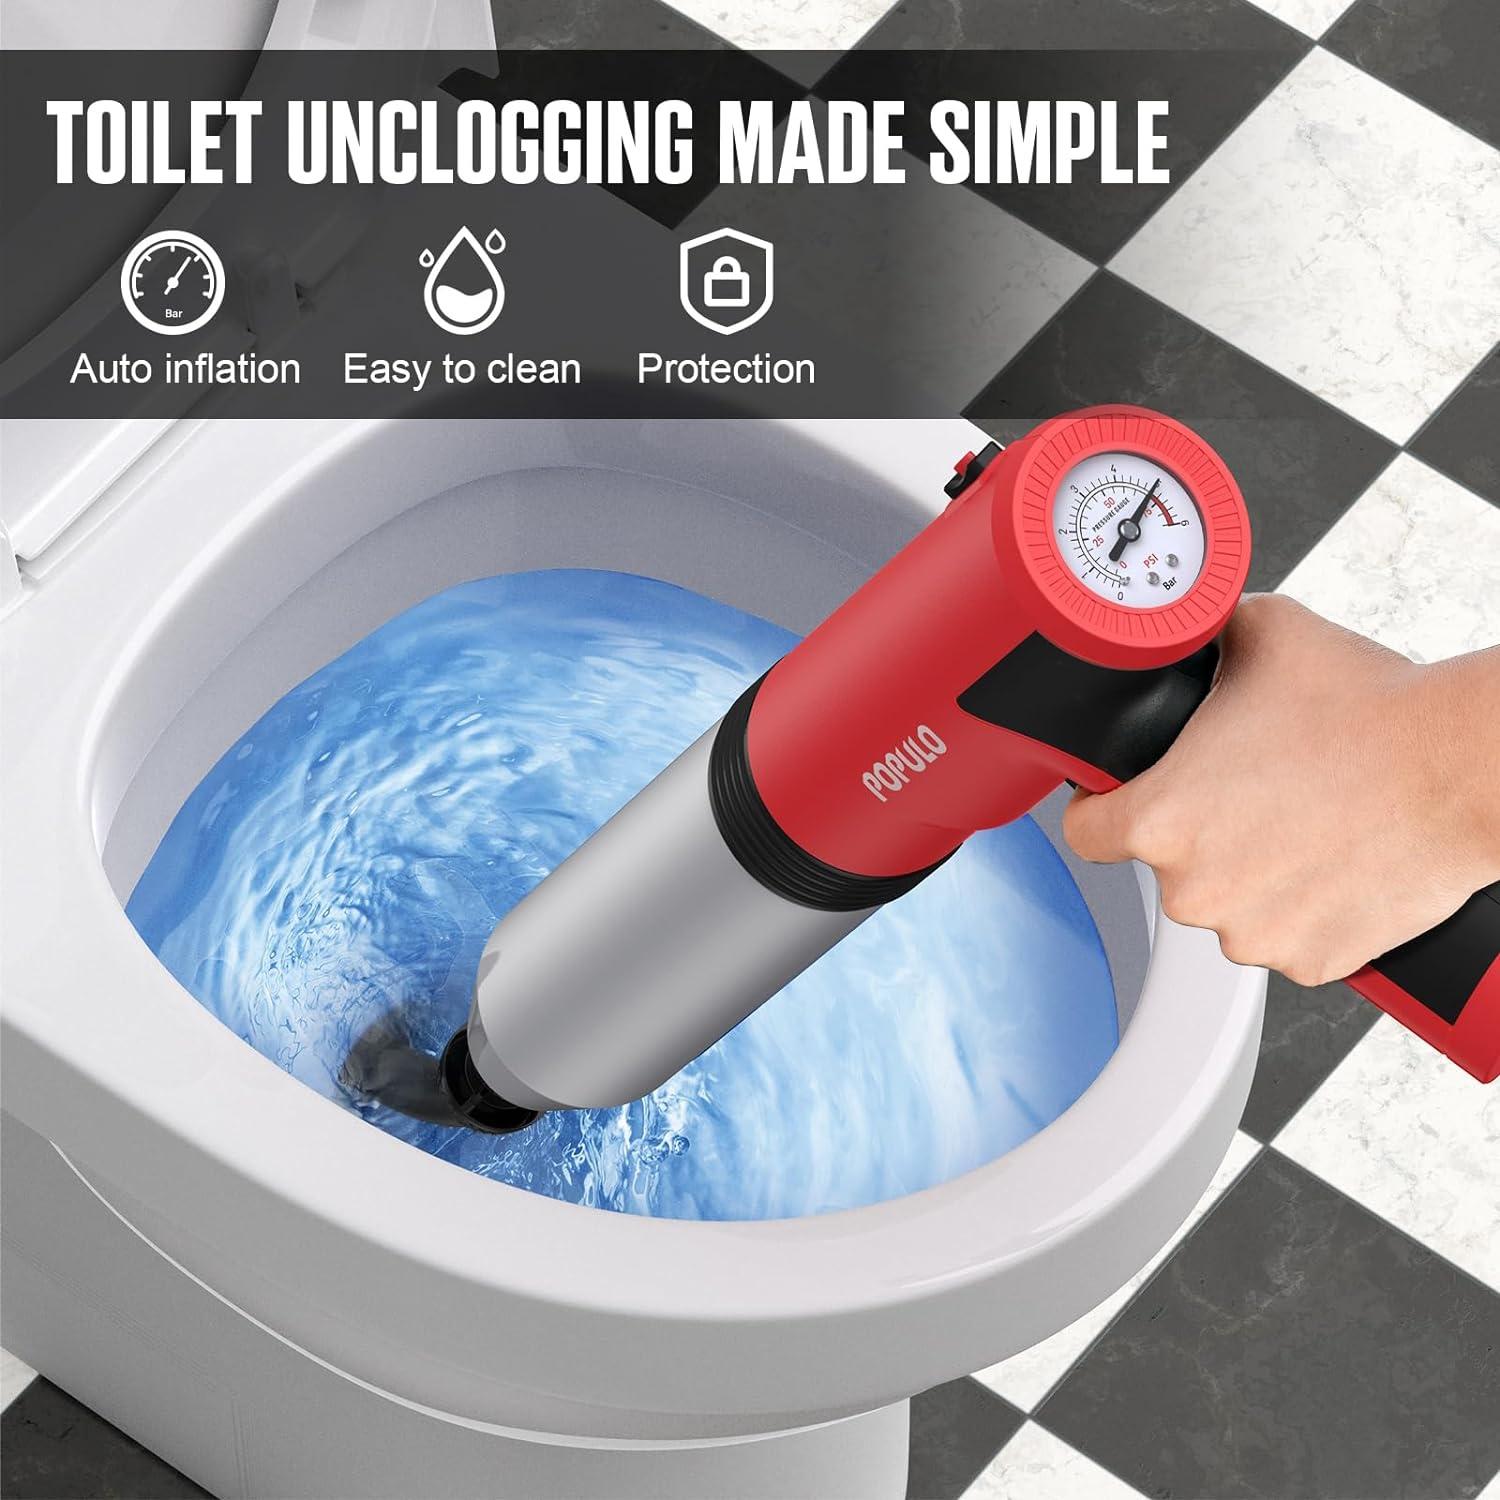 Effortless Toilet Unclogging with POPULO Electric Plunger